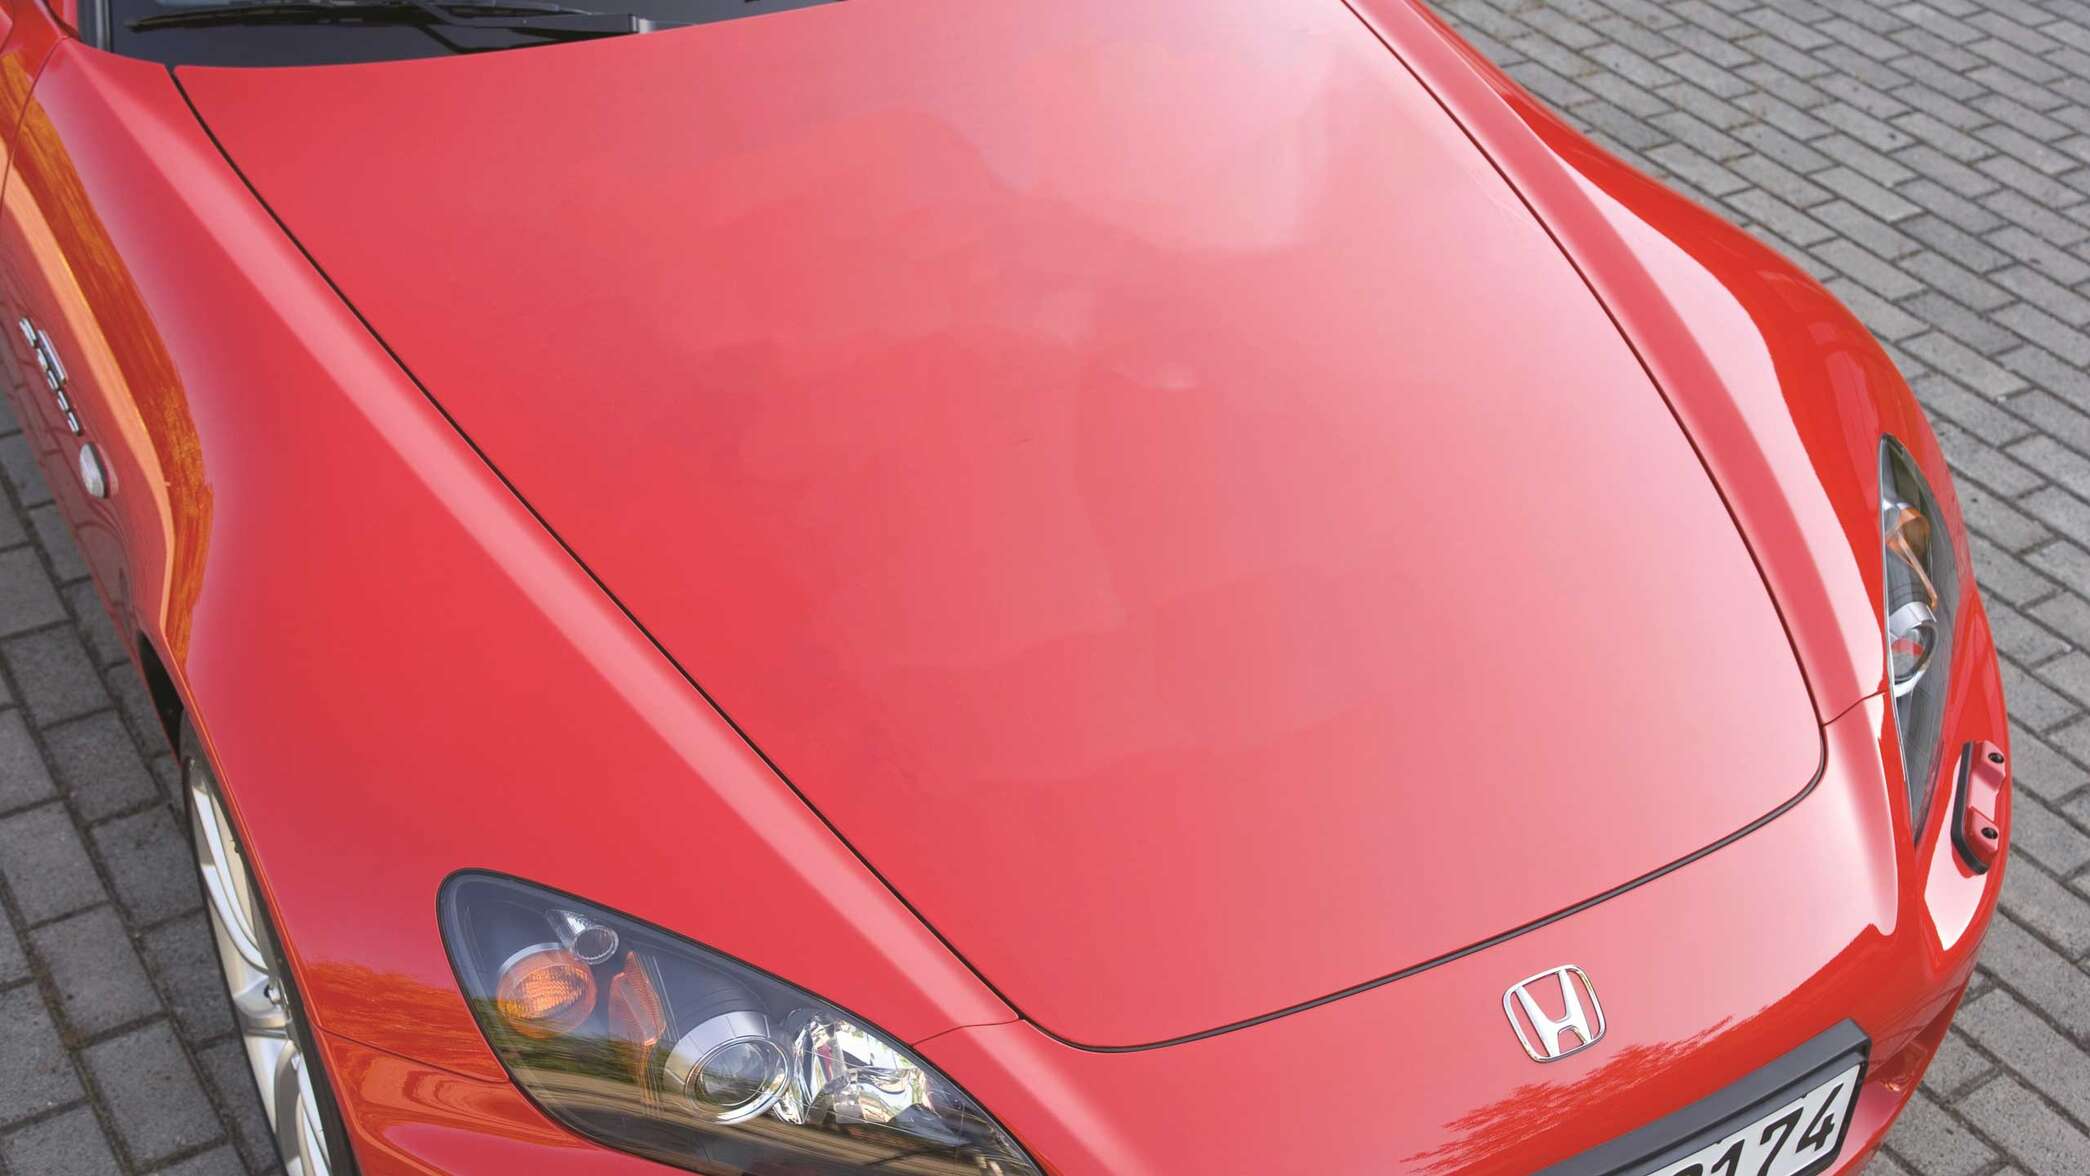 Camera shot of the top of a red Honda S2000.